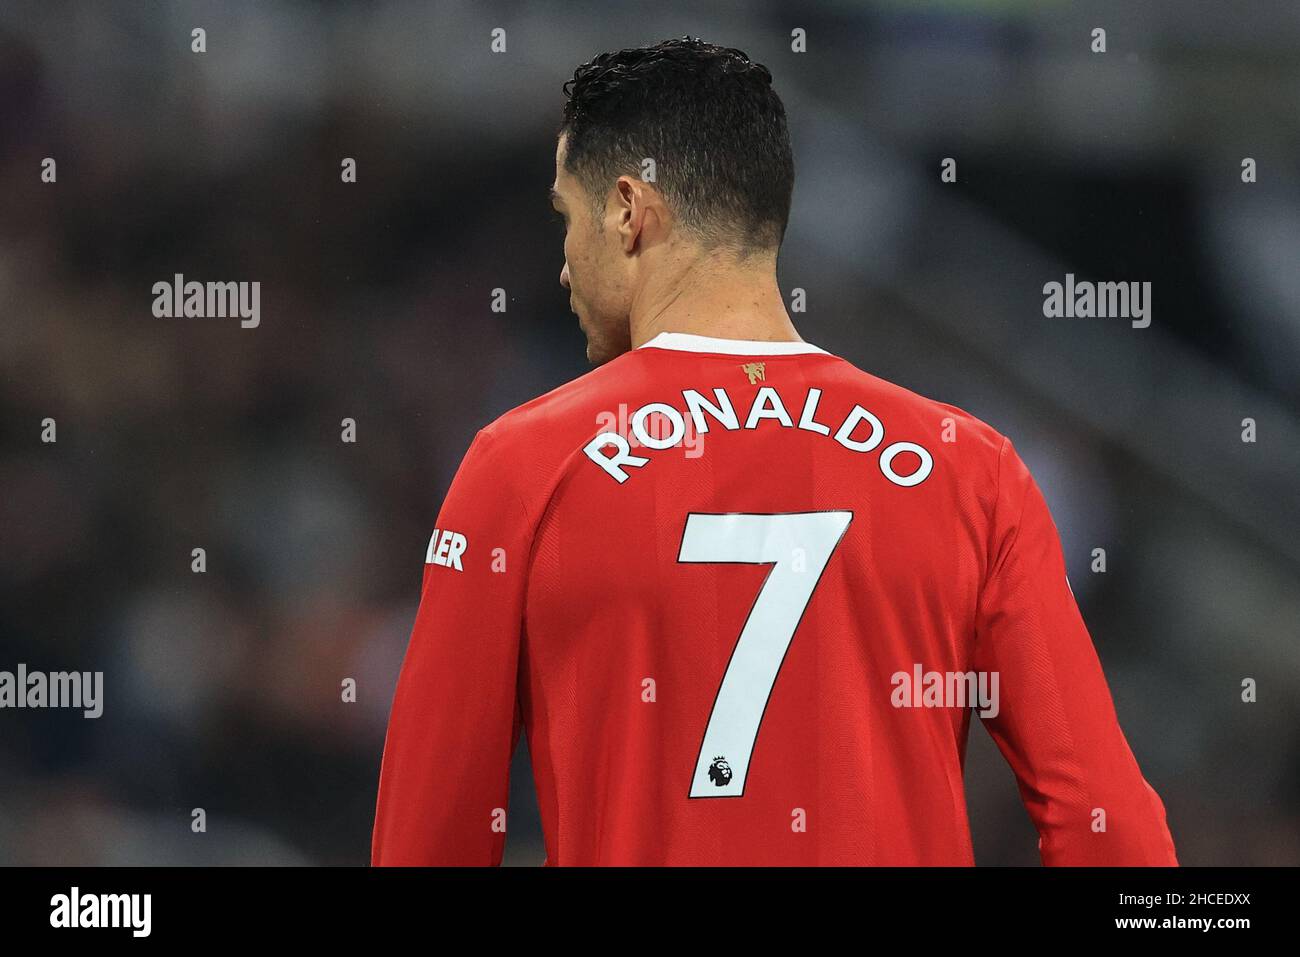 Newcastle, UK. 27th Dec, 2021. The back Cristiano Ronaldo #7 of Manchester United's shirt in Newcastle, United Kingdom on 12/27/2021. (Photo by Mark Cosgrove/News Images/Sipa USA) Credit: Sipa USA/Alamy Live News Stock Photo